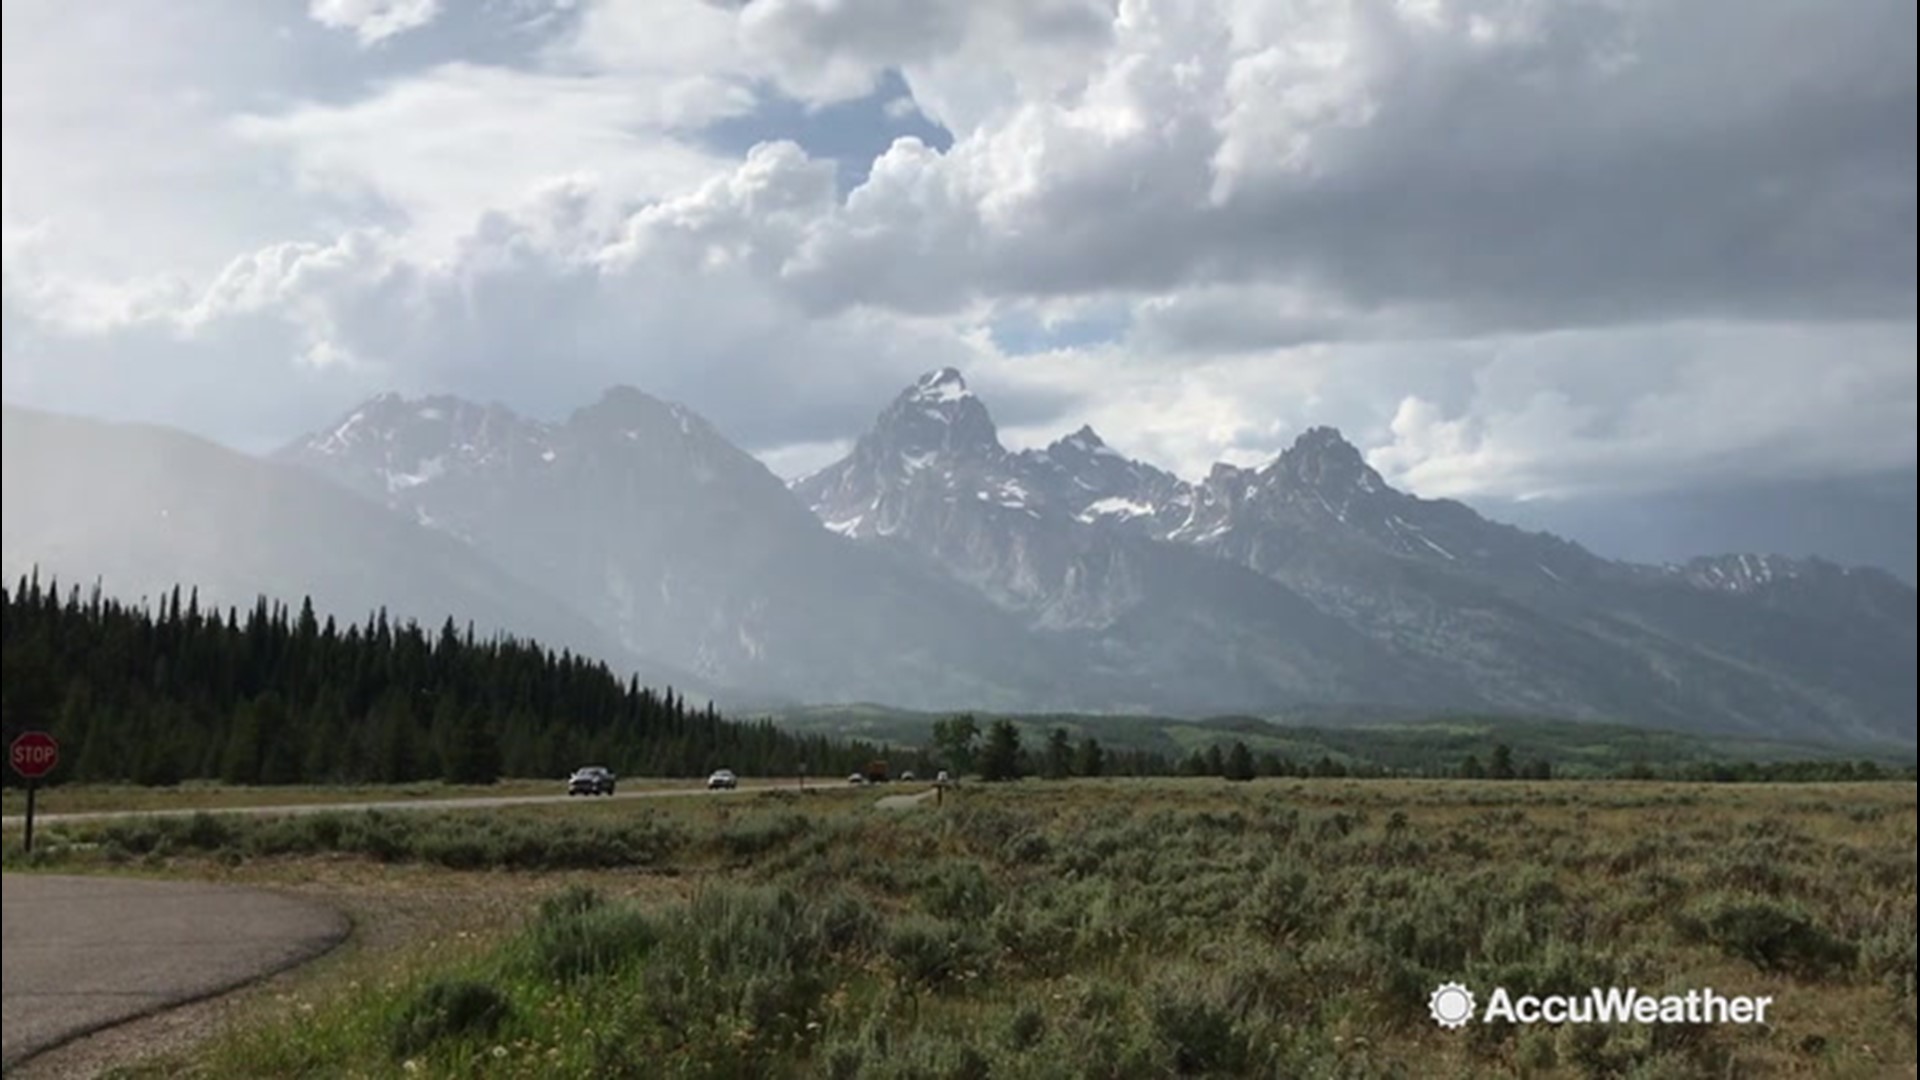 AccuWeather's Lincoln Riddle spent an evening exploring Grand Teton National Park as the Great American Road Trip continues in Wyoming. The park is known for its rugged mountains, pristine views and ease of access.